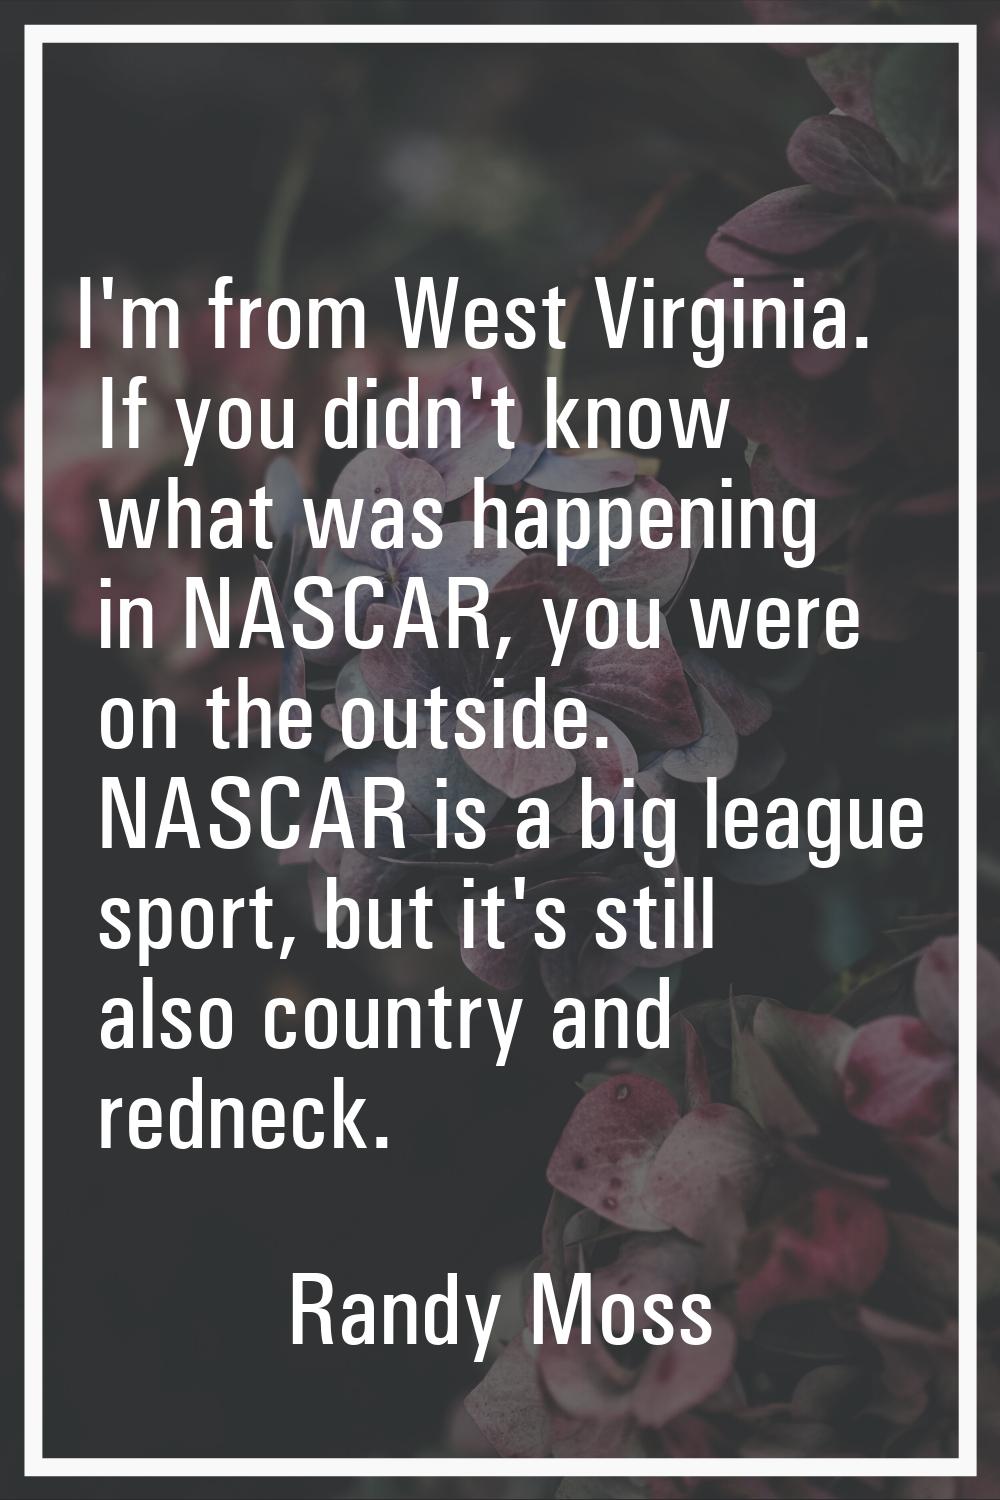 I'm from West Virginia. If you didn't know what was happening in NASCAR, you were on the outside. N